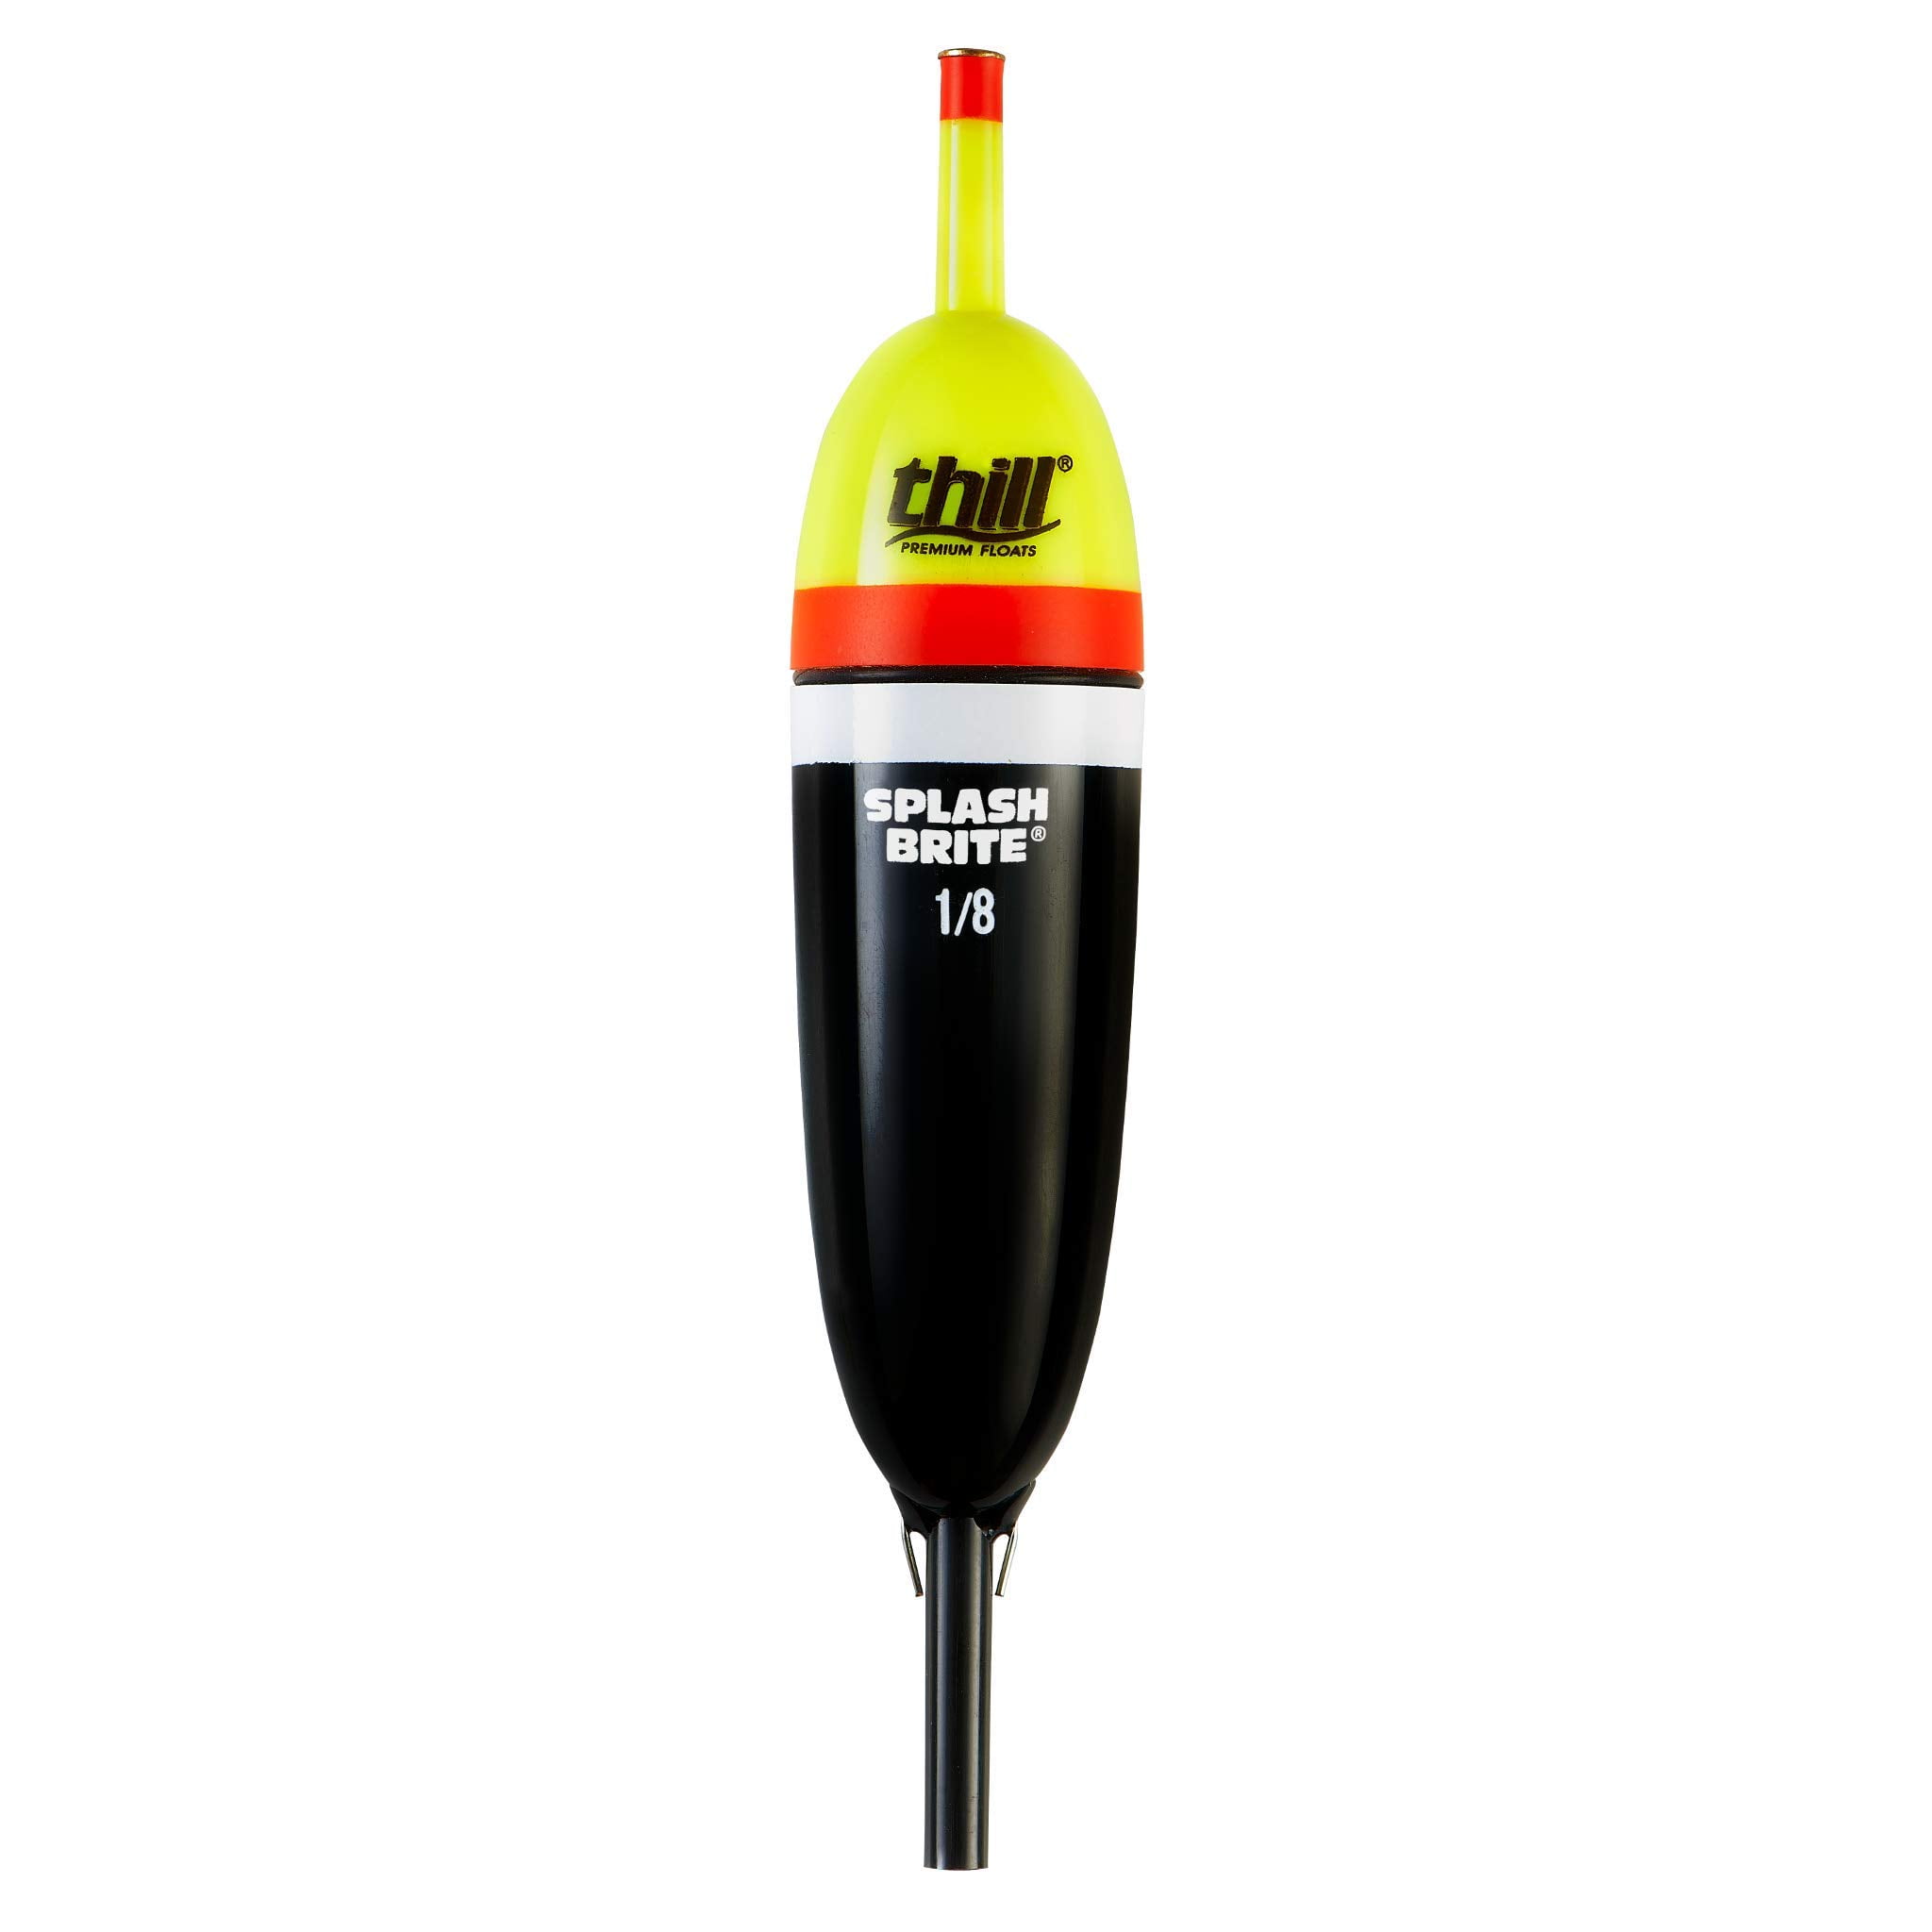 Thill Floats Splash Brite Lighted Bobber for Fishing - Center Slider Slip  Float - Lights Up on Contact with Water, Medium, Yellow Red Black, One Size  